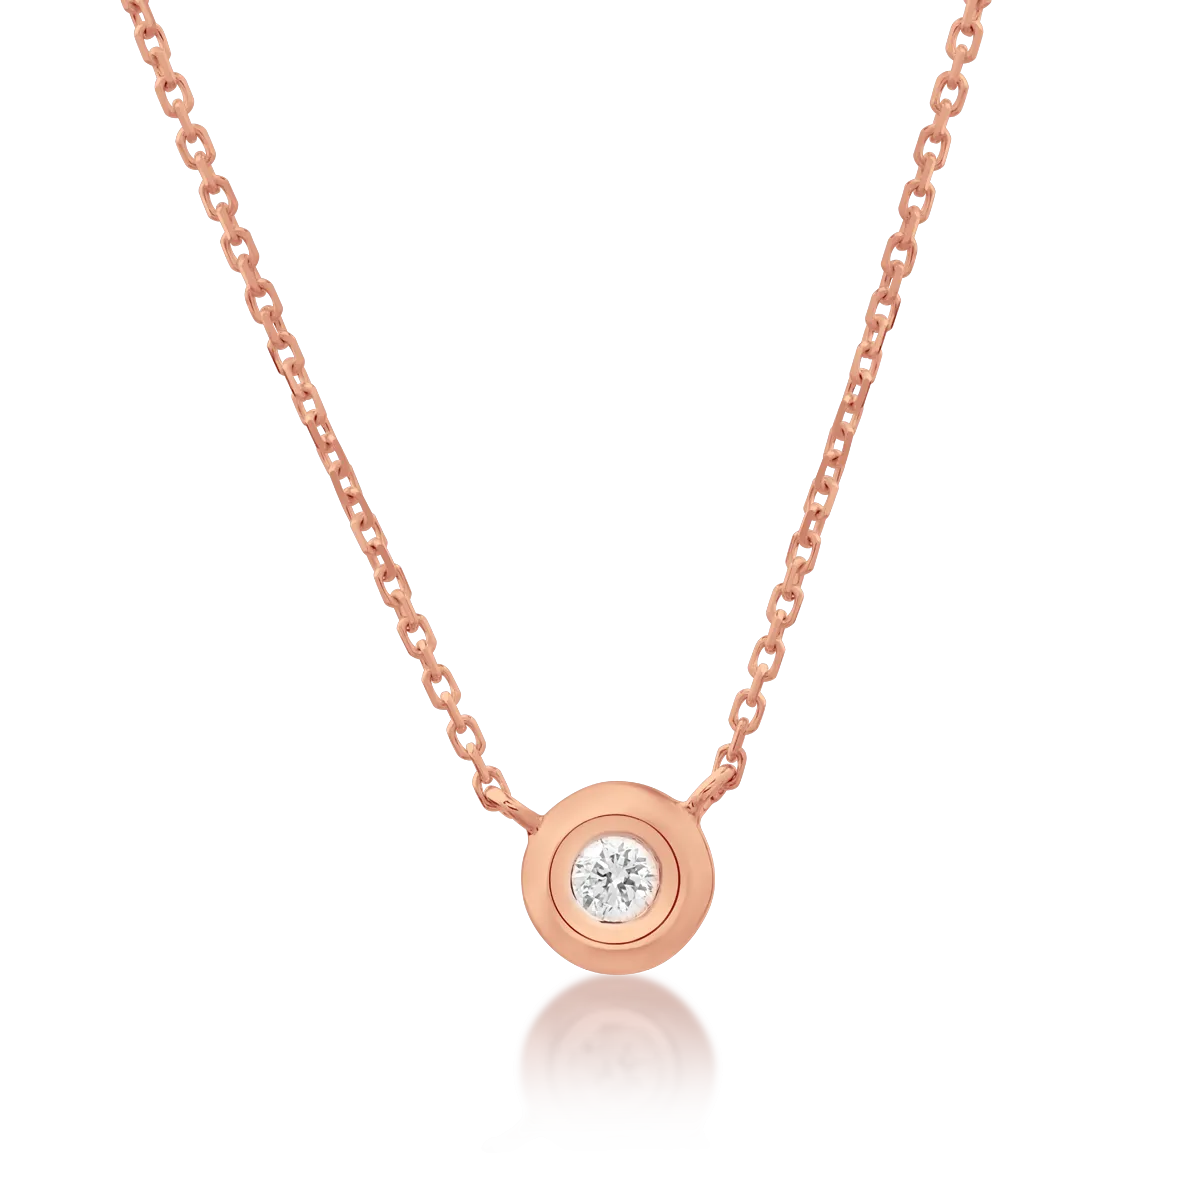 18K rose gold pendant necklace with 0.033ct diamond